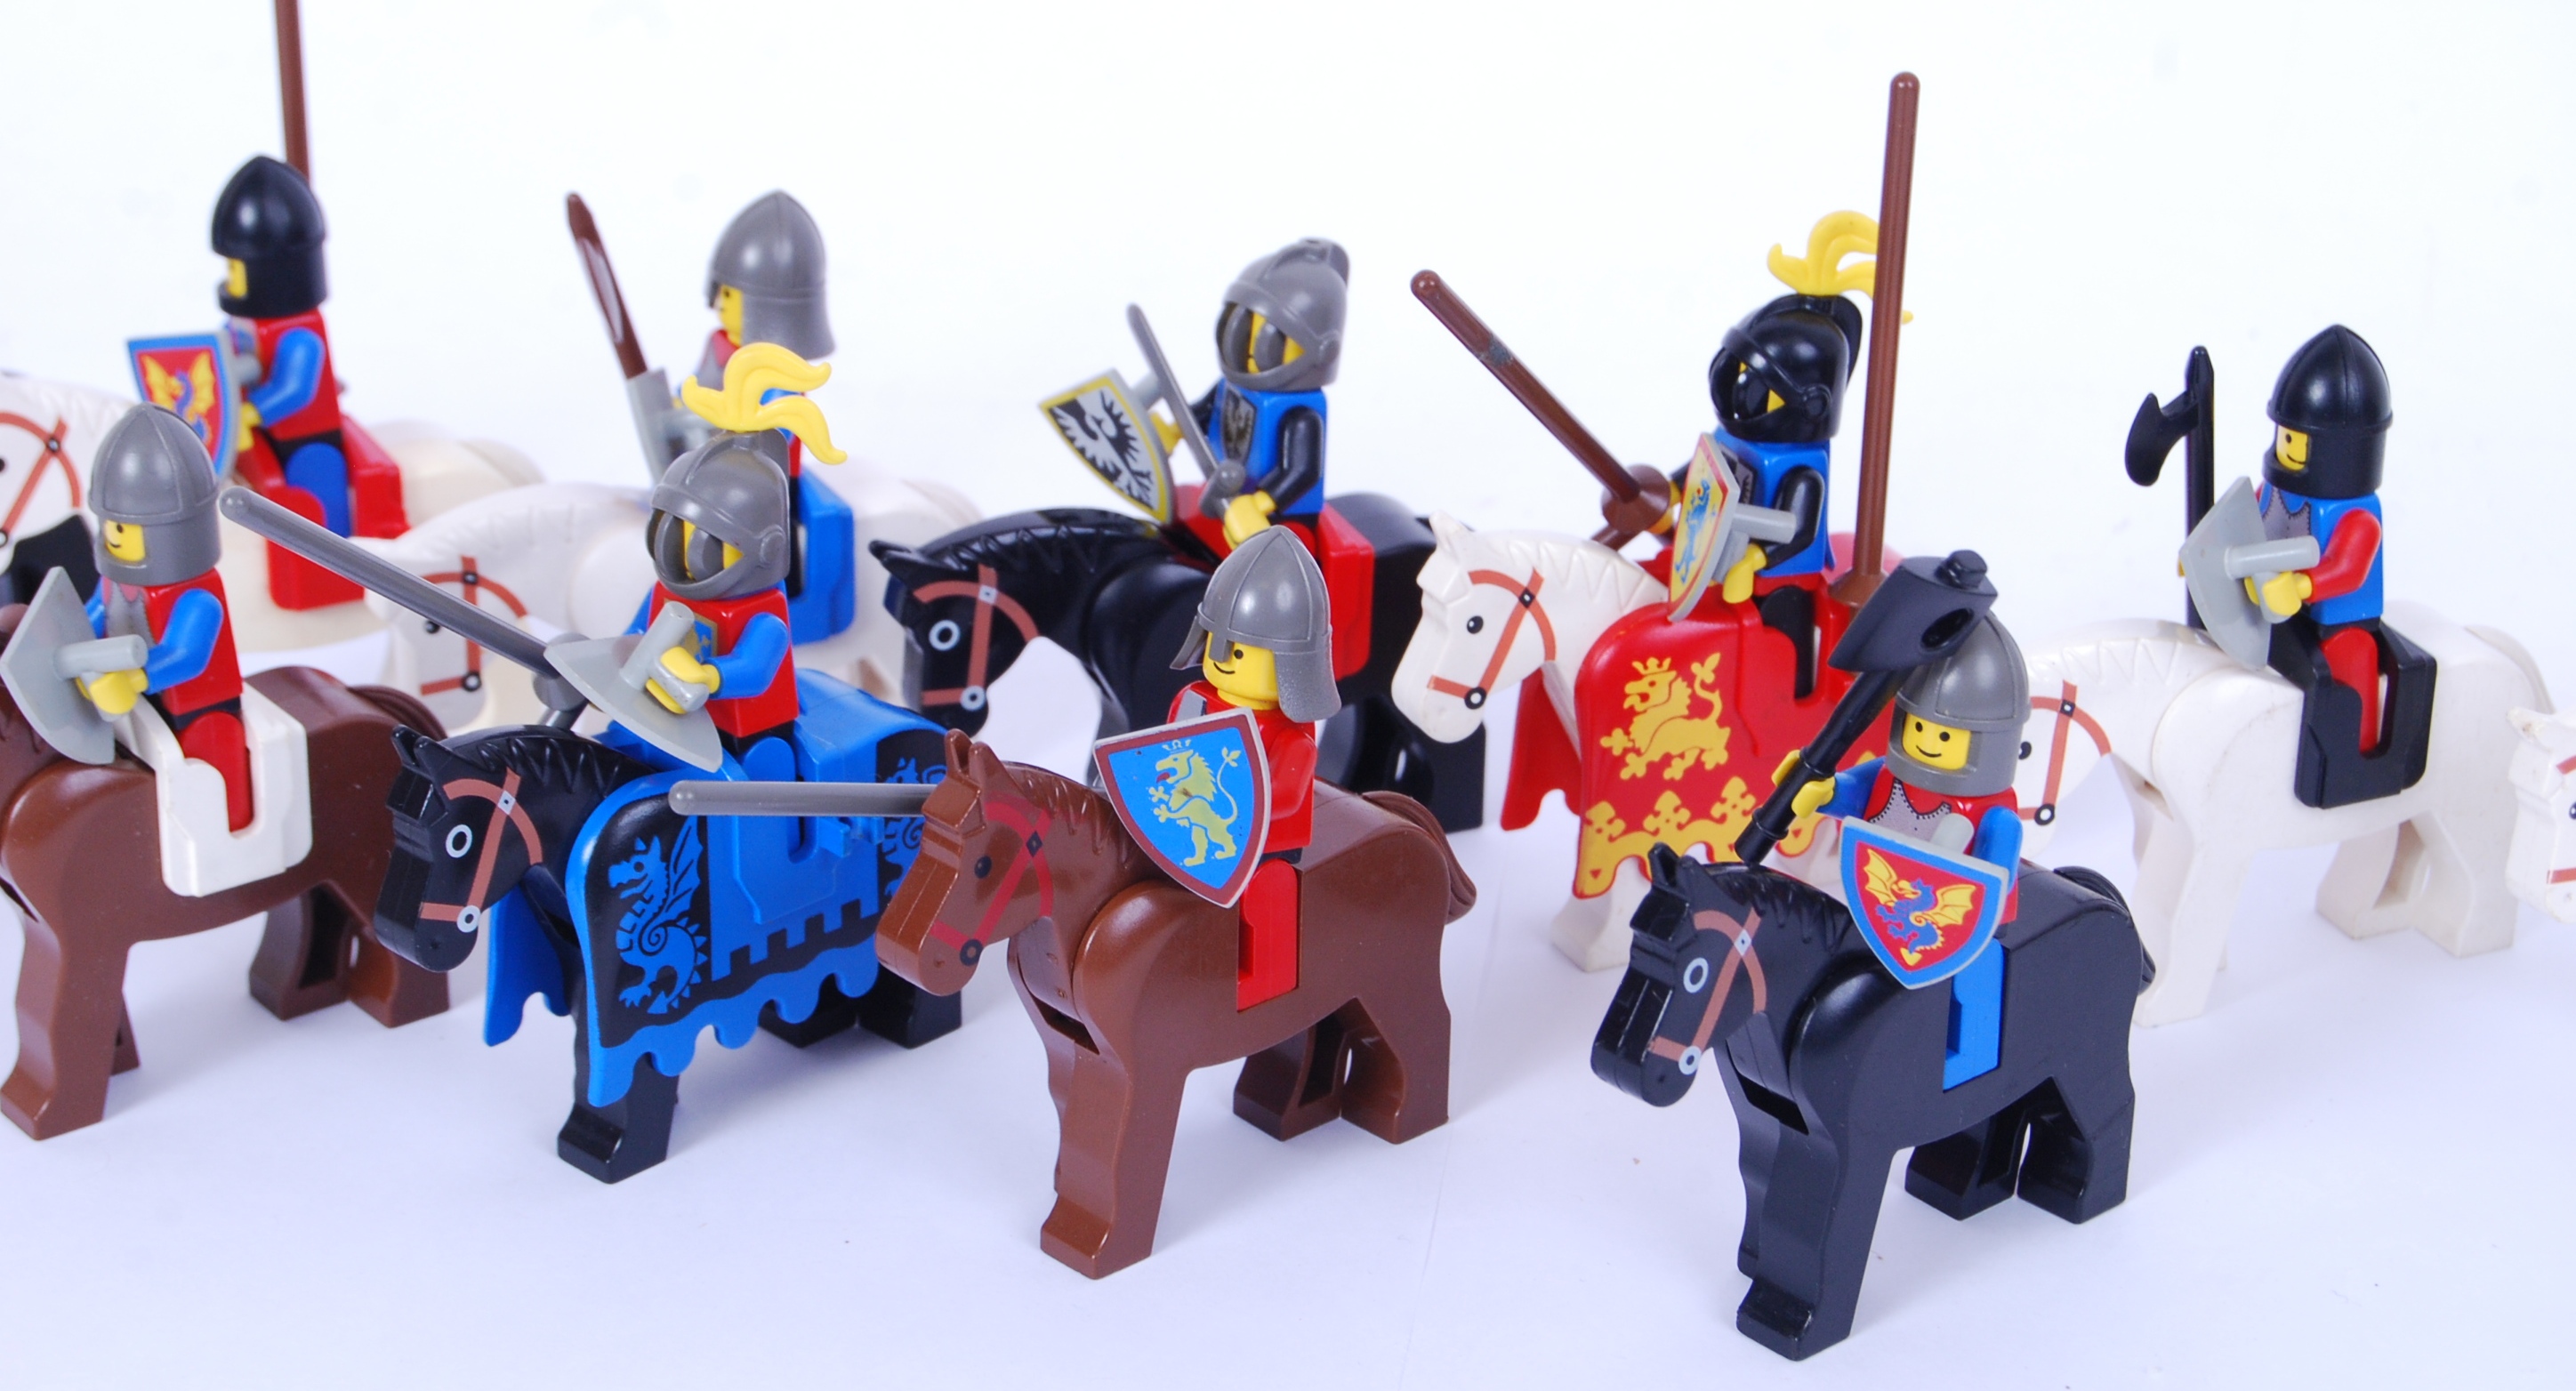 VINTAGE MINIFIGURES: A collection of 12x vintage 1980's Lego minifigures - all knights on horseback, - Image 3 of 4